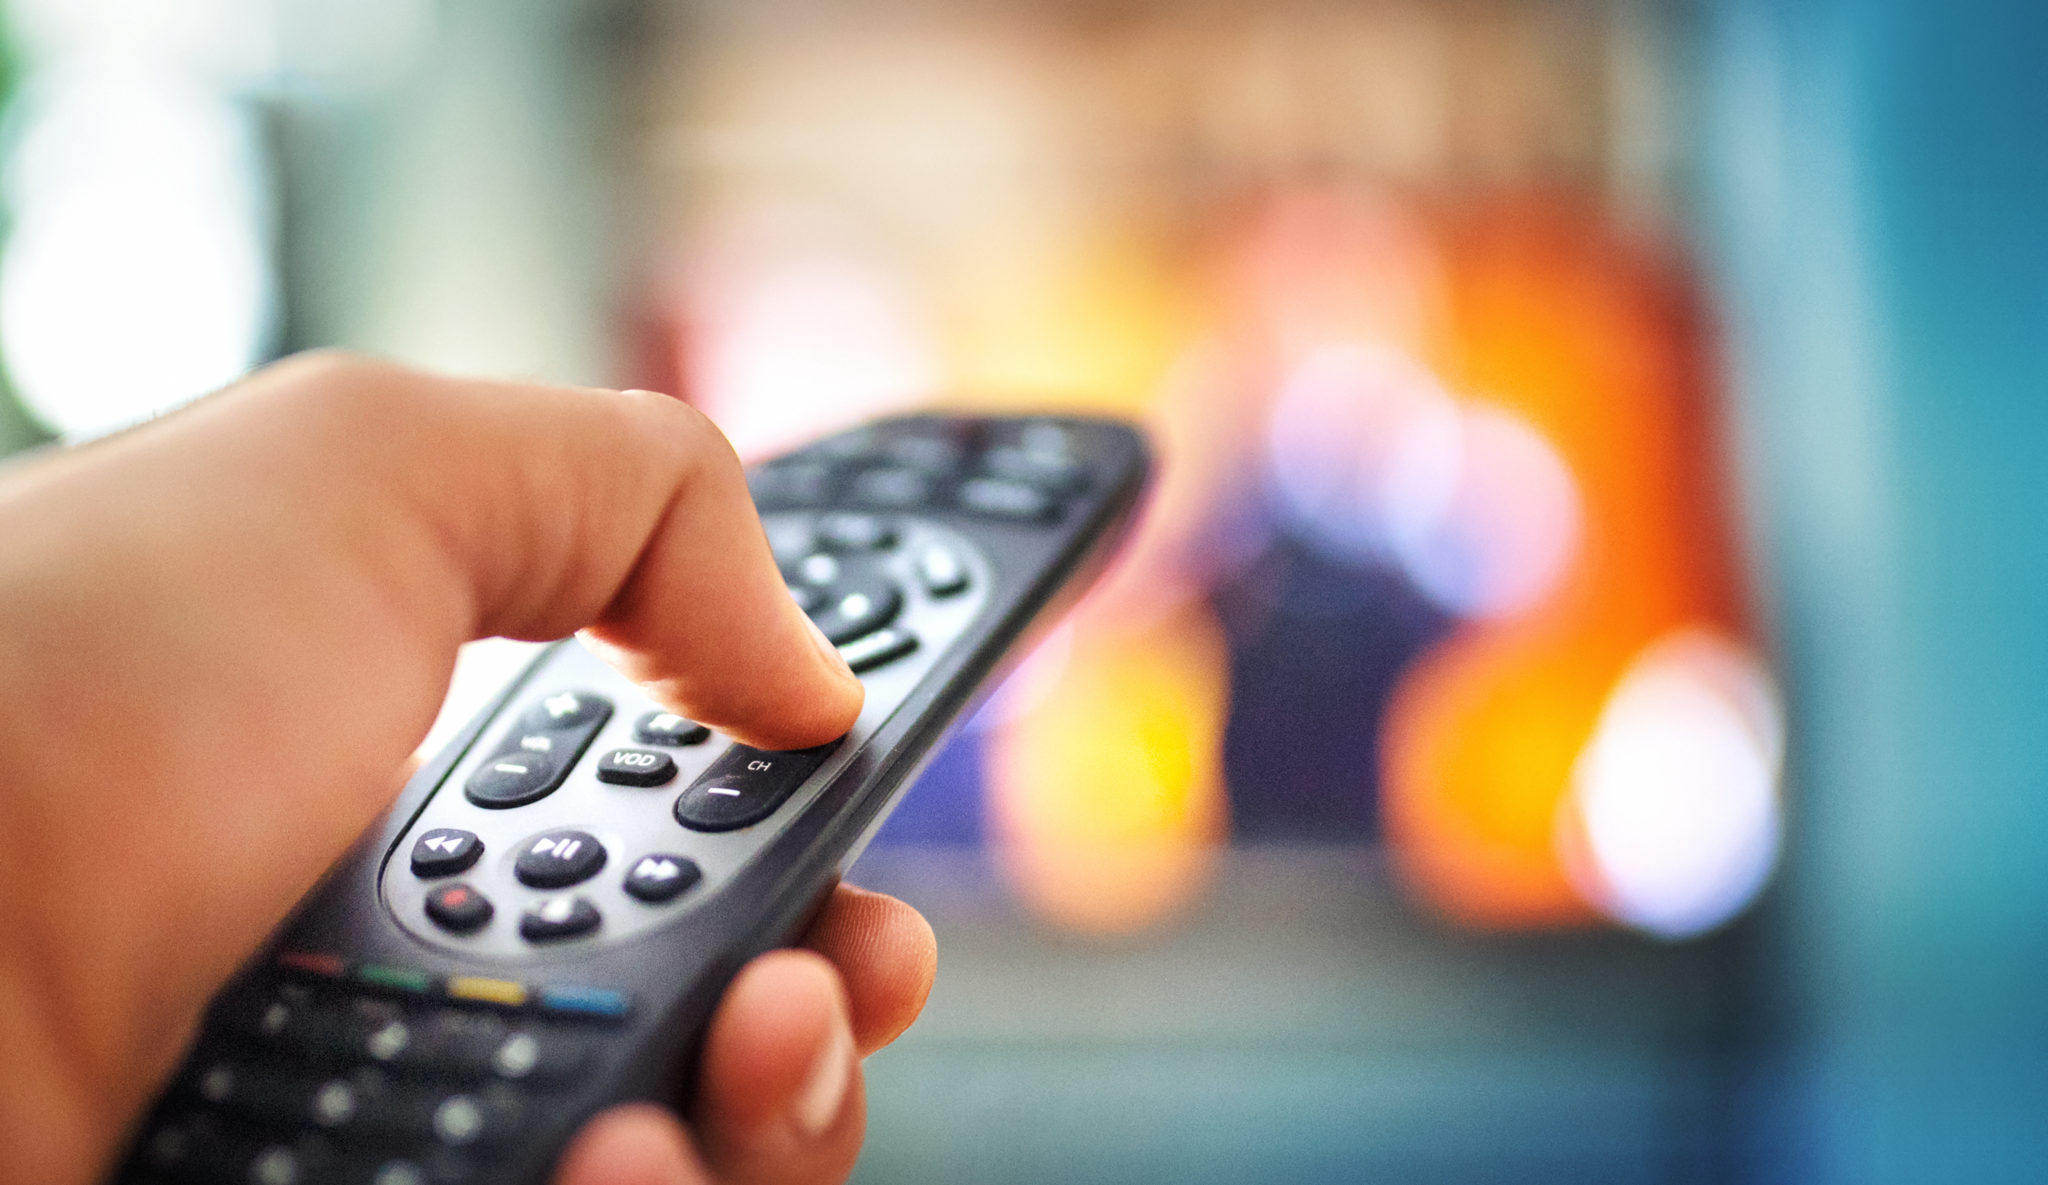 Top Cable and Pay TV Providers Lost 1.23 Million Customers in Q2